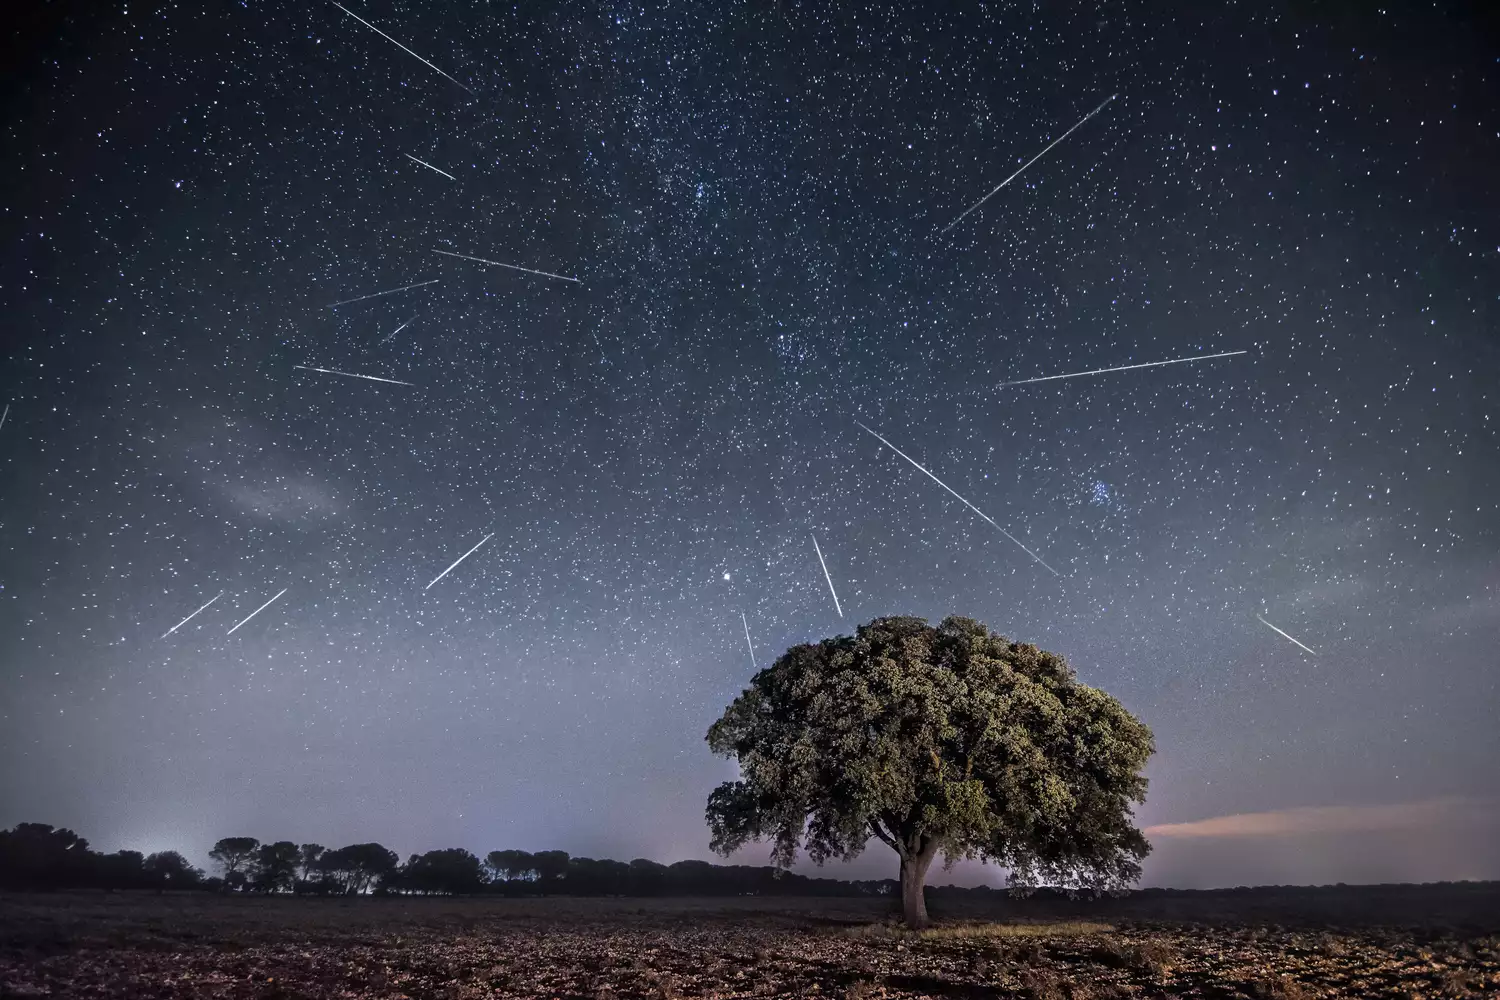 Meteor shower over a tree